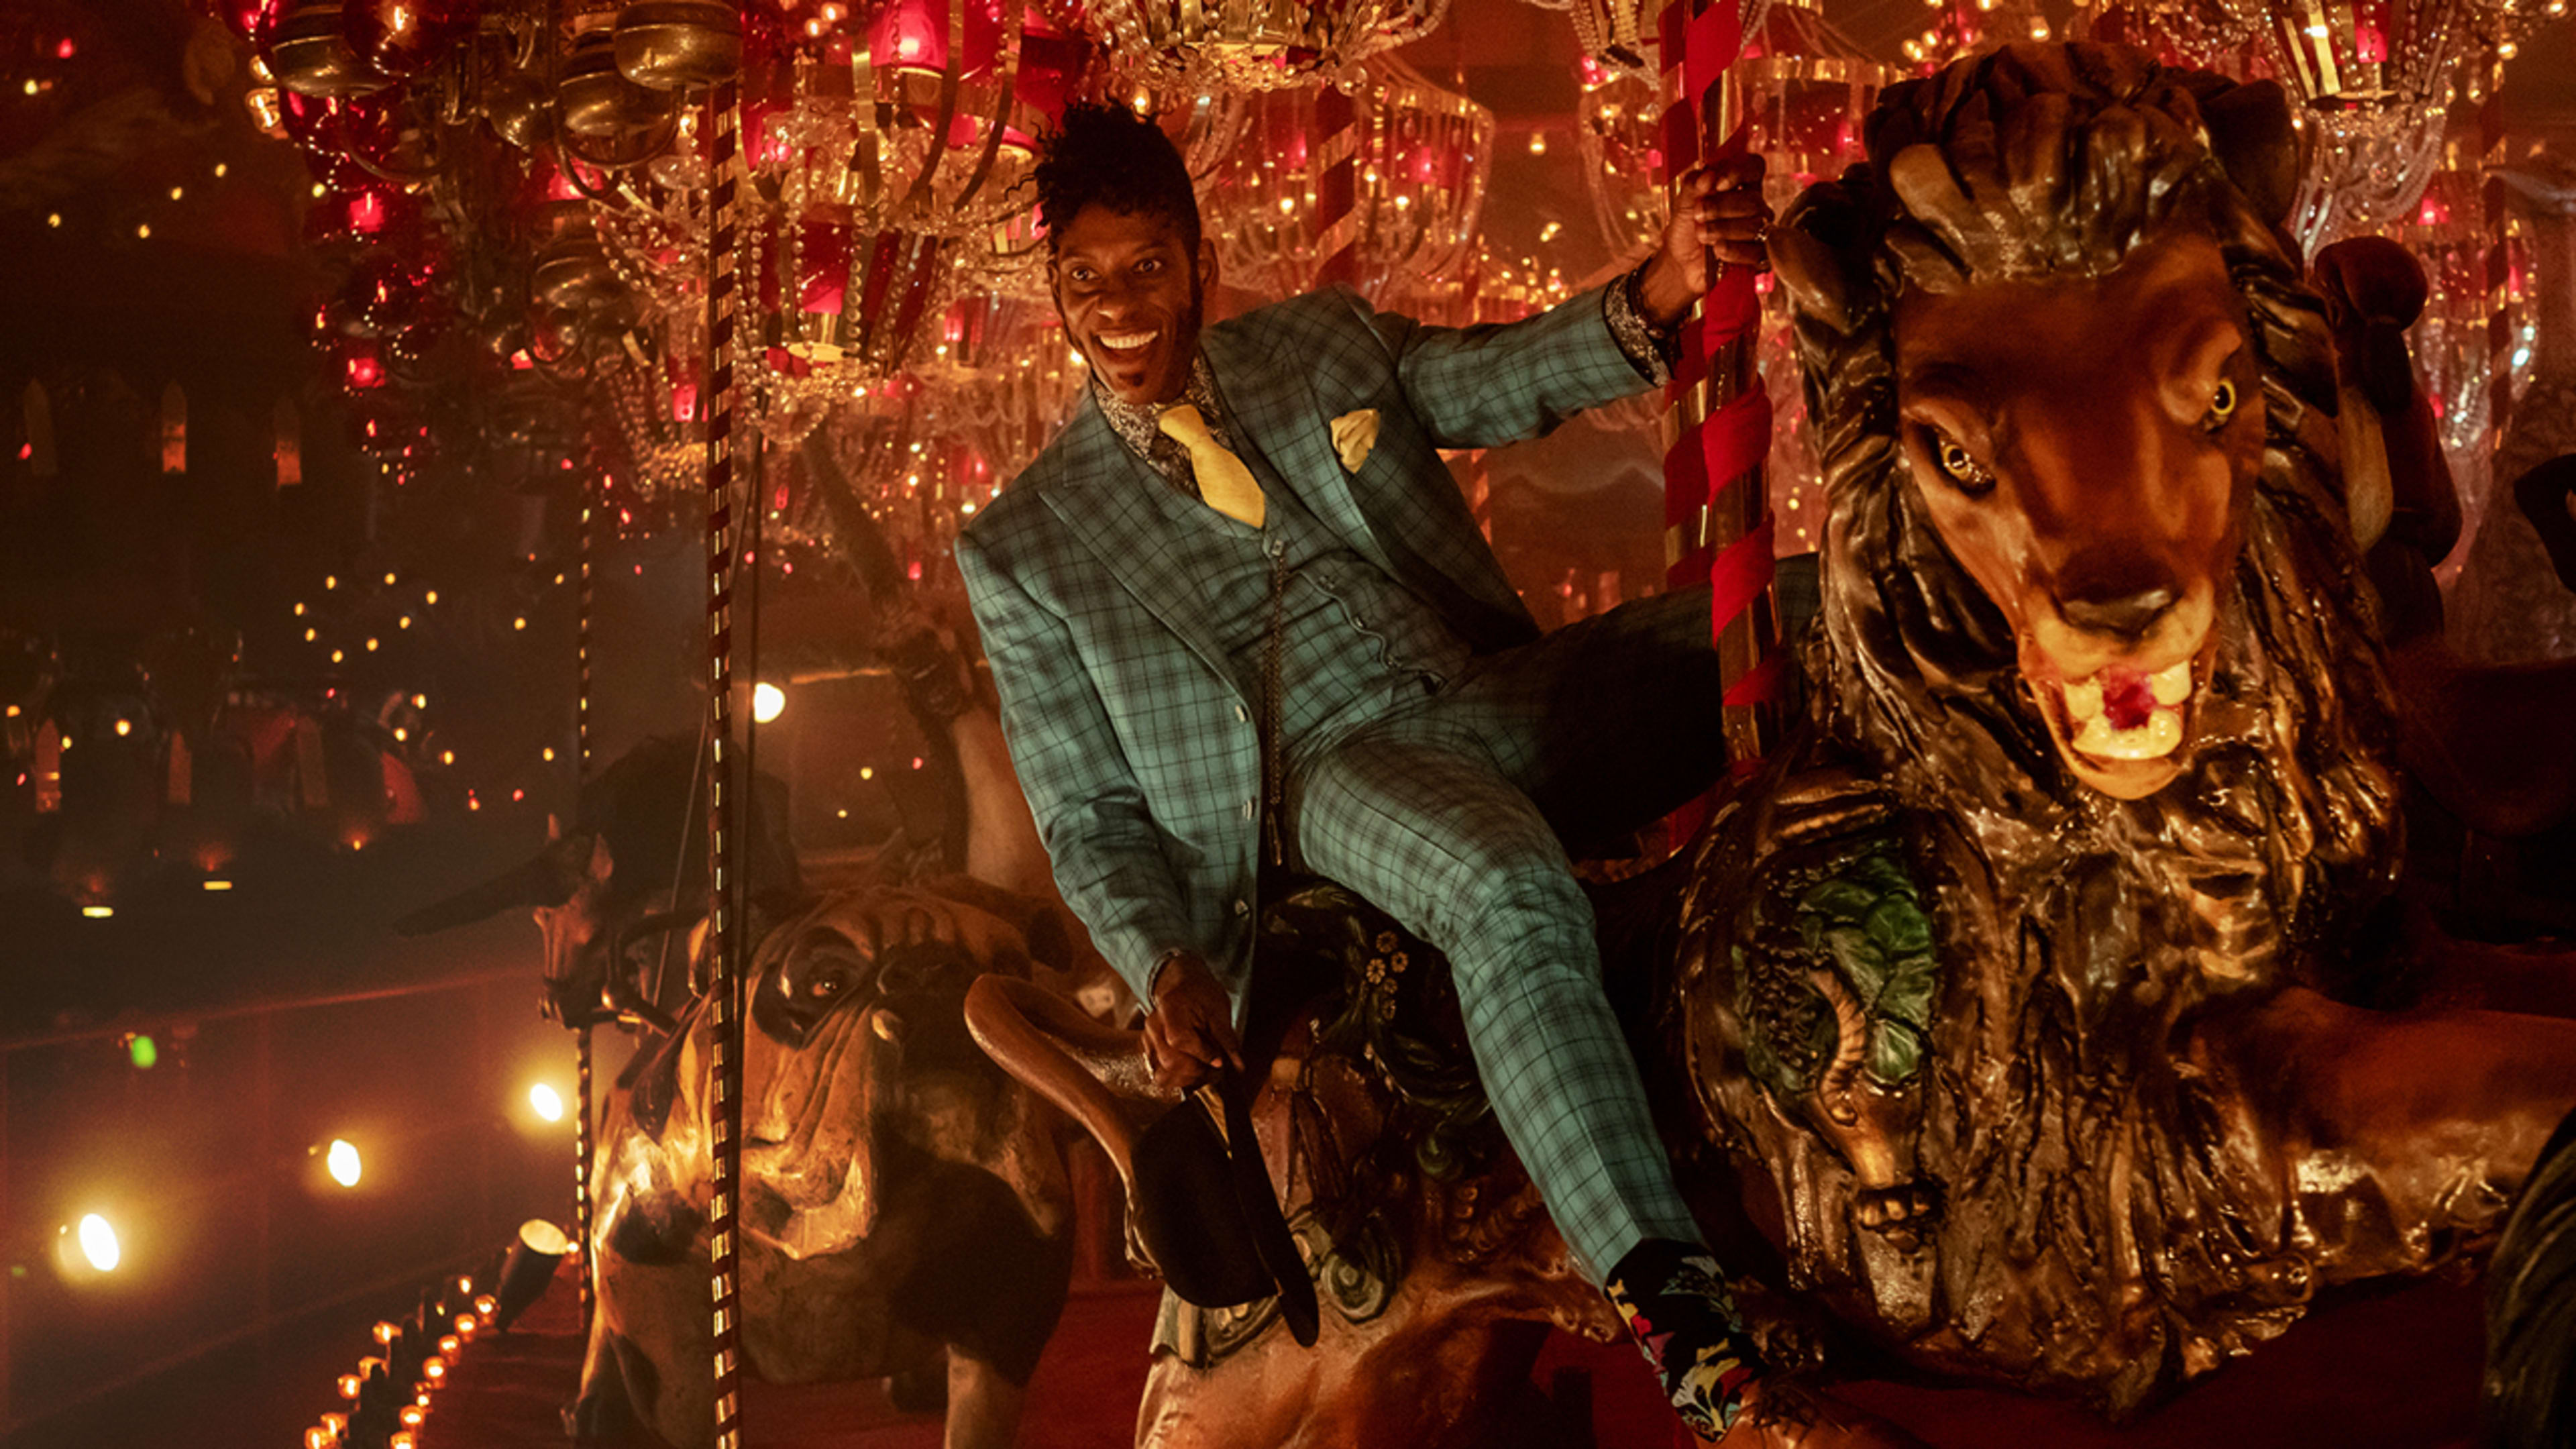 Orlando Jones says he was fired from ‘American Gods’ because its white showrunner found his character ‘angry’